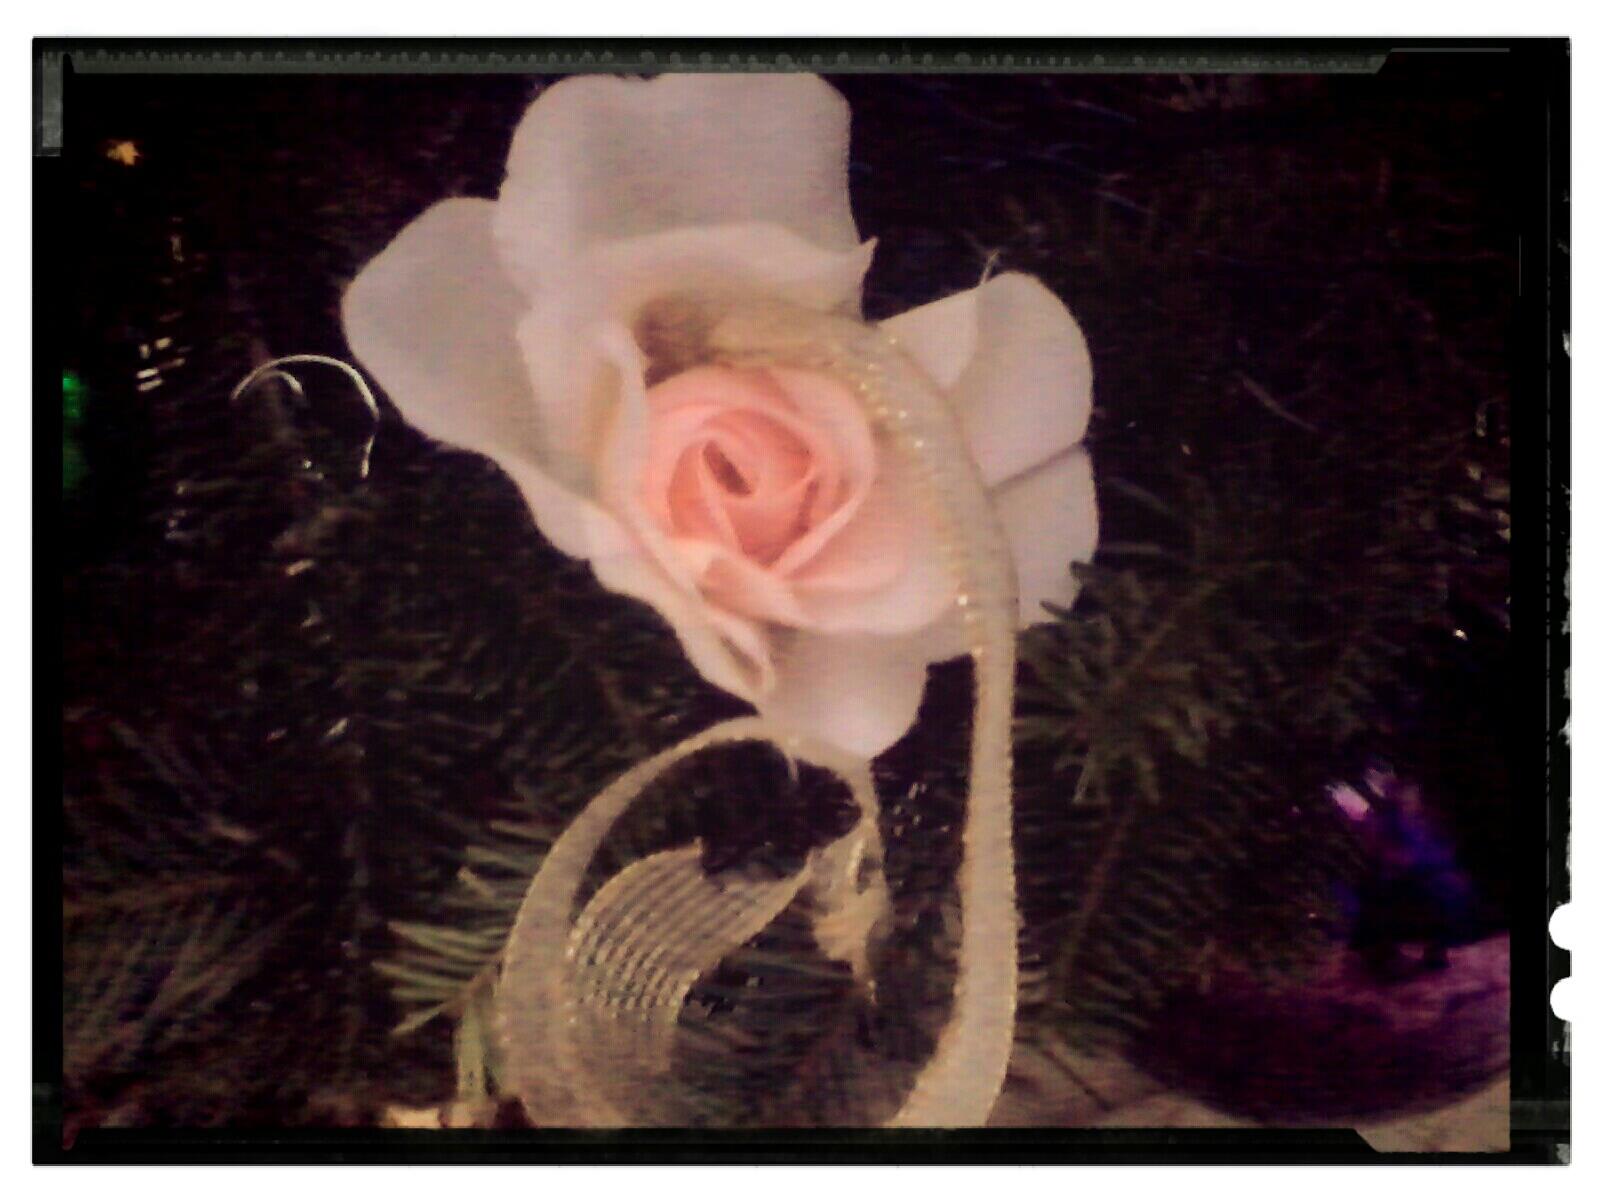 A rose on the Christmas tree